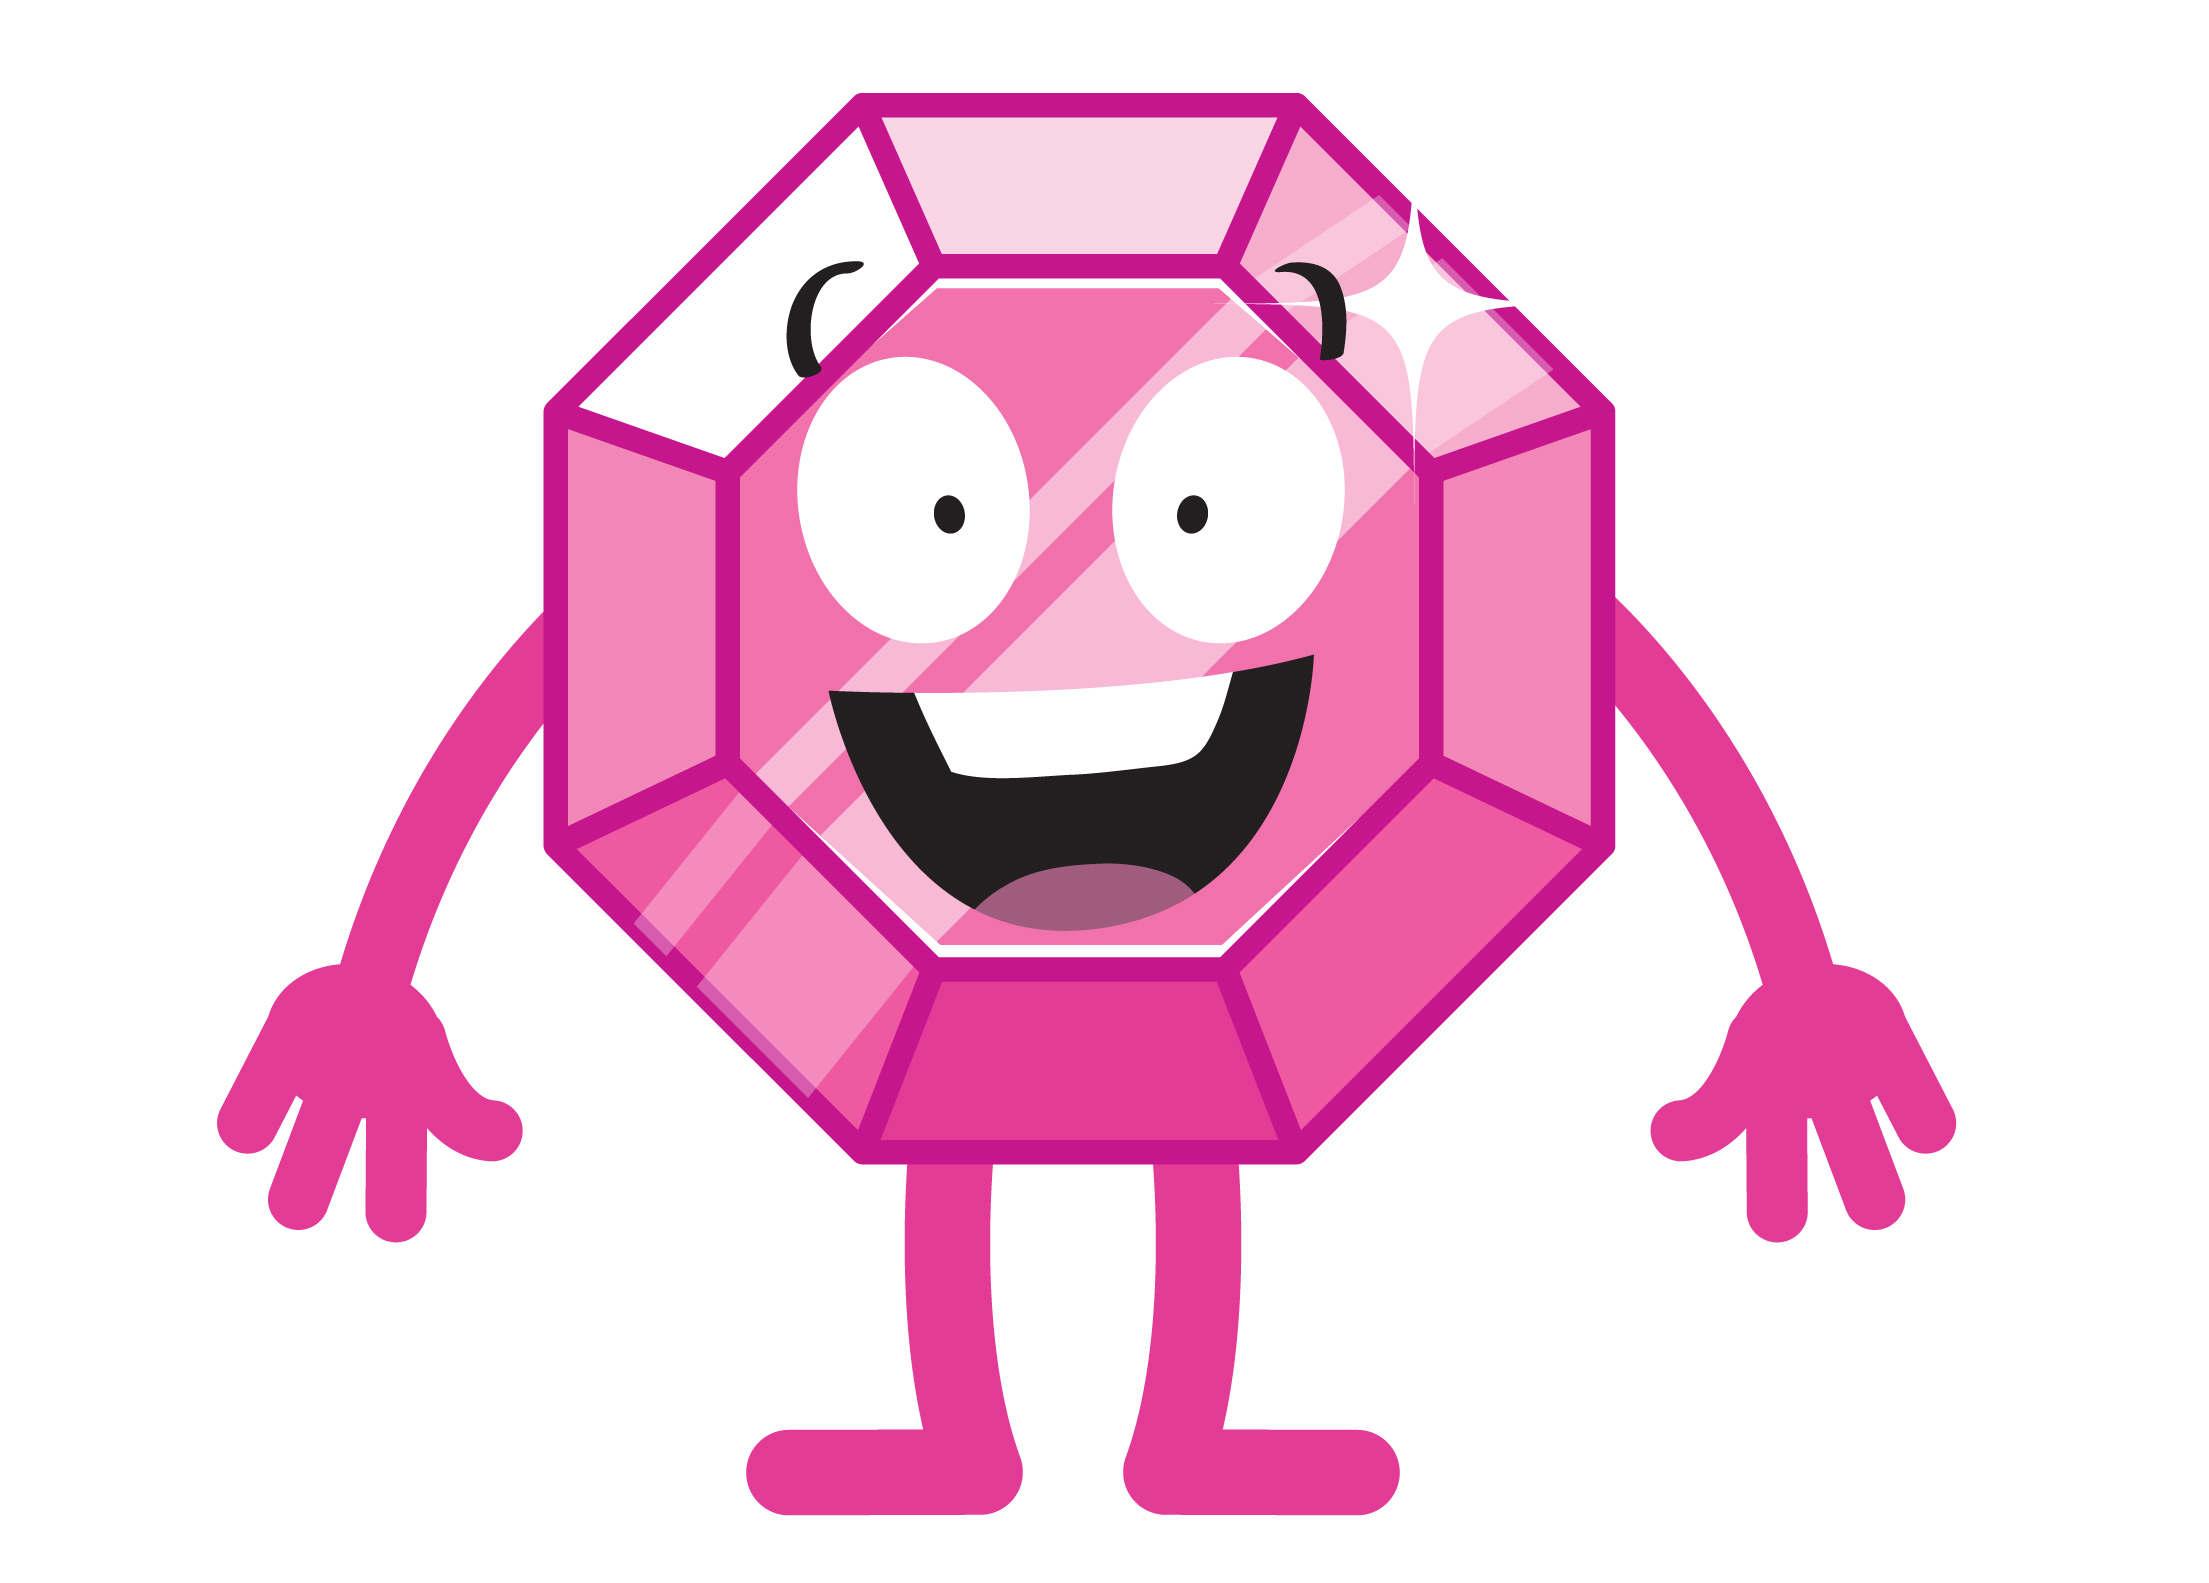 Together with a designer I created Brilo, the happy glitter, as a mascot for Glitterbaas